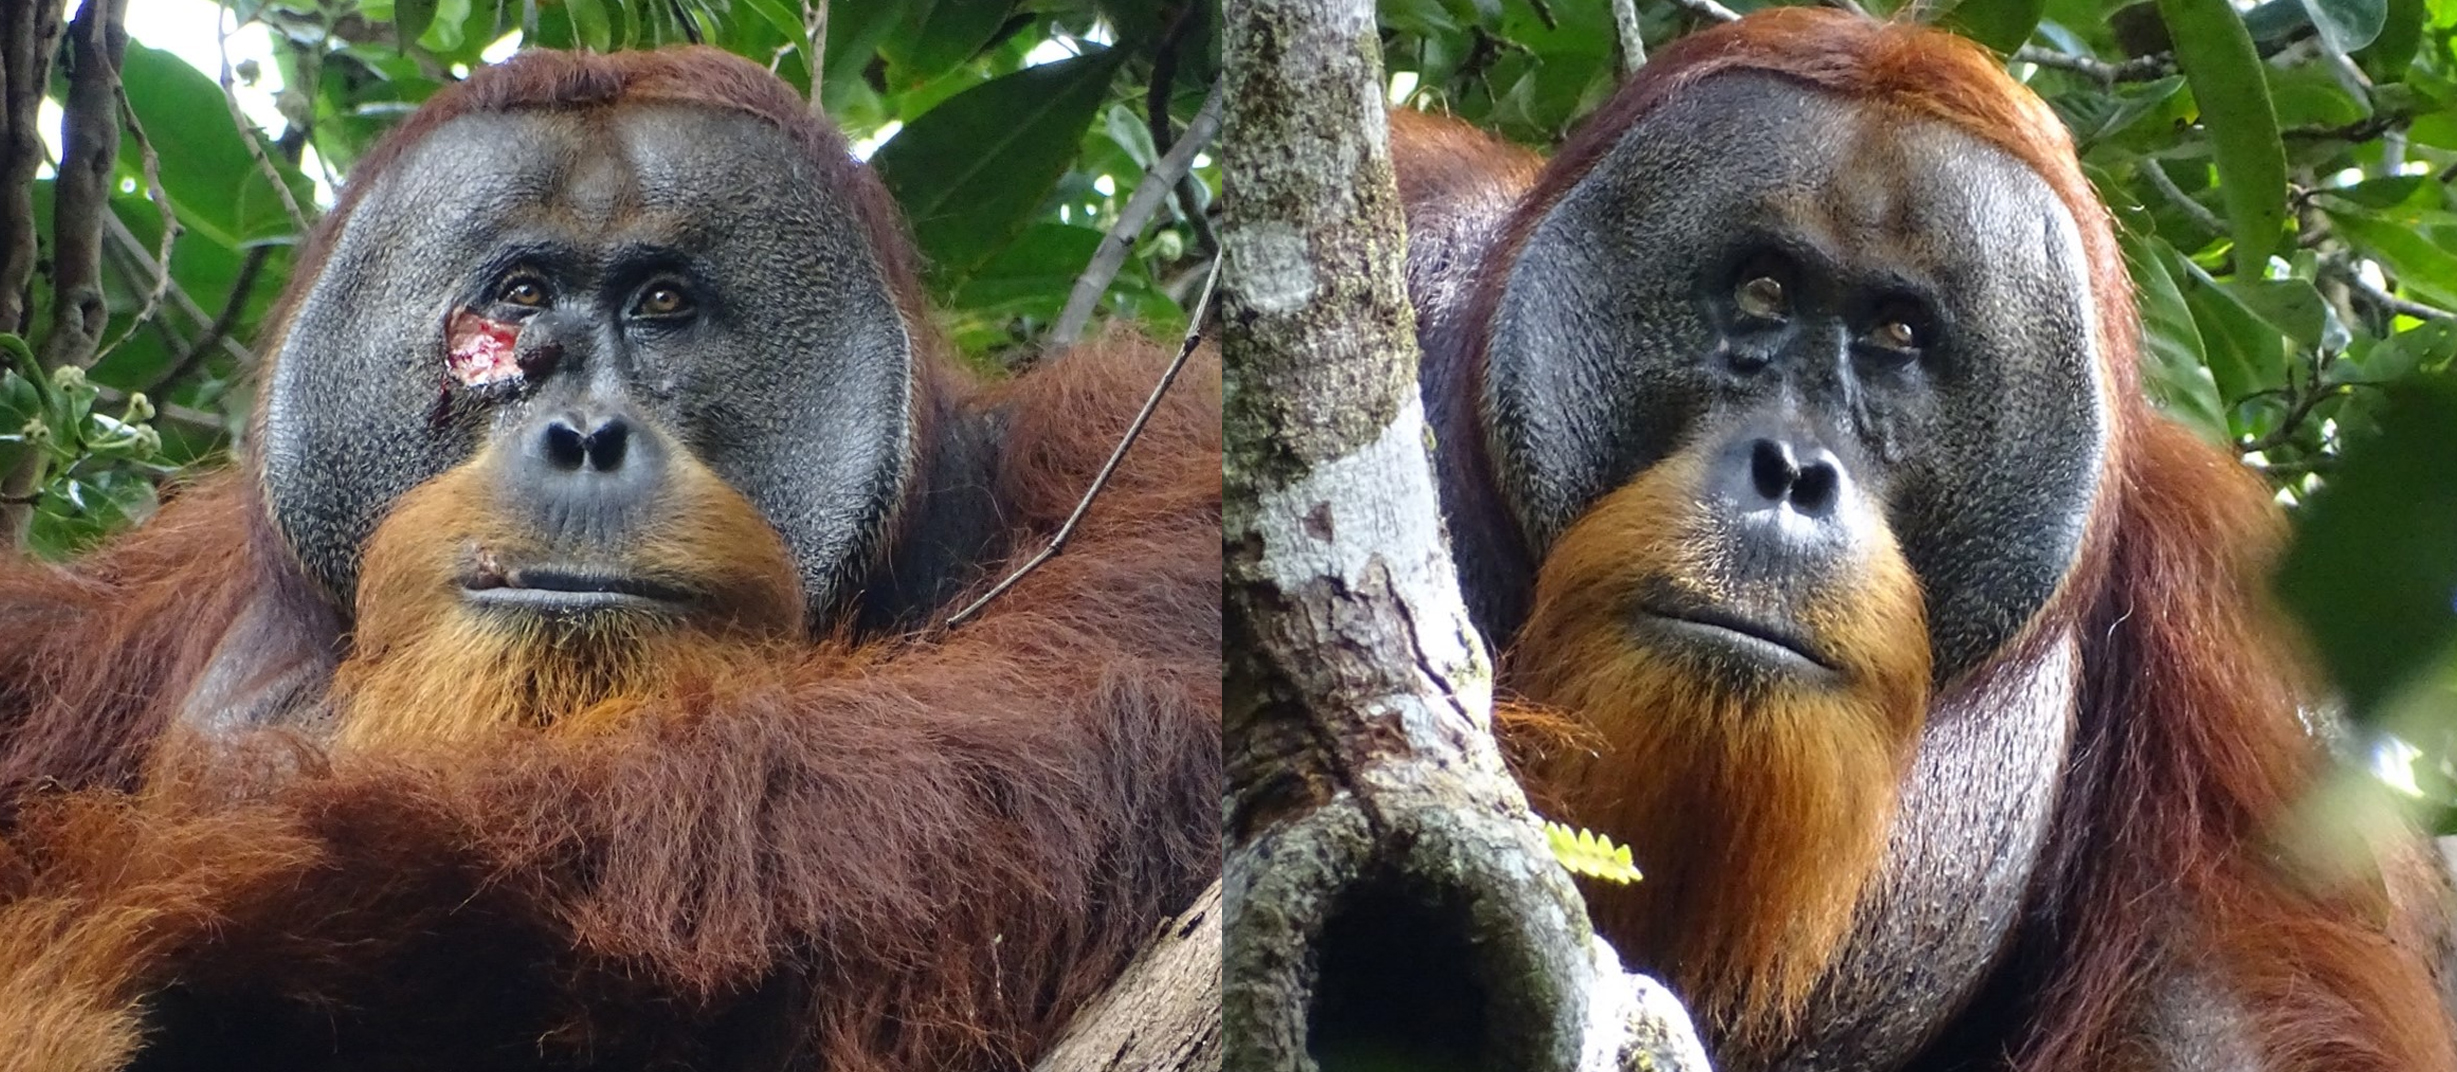 Orangutan with clear facial wound on the left and healed over scar on the right